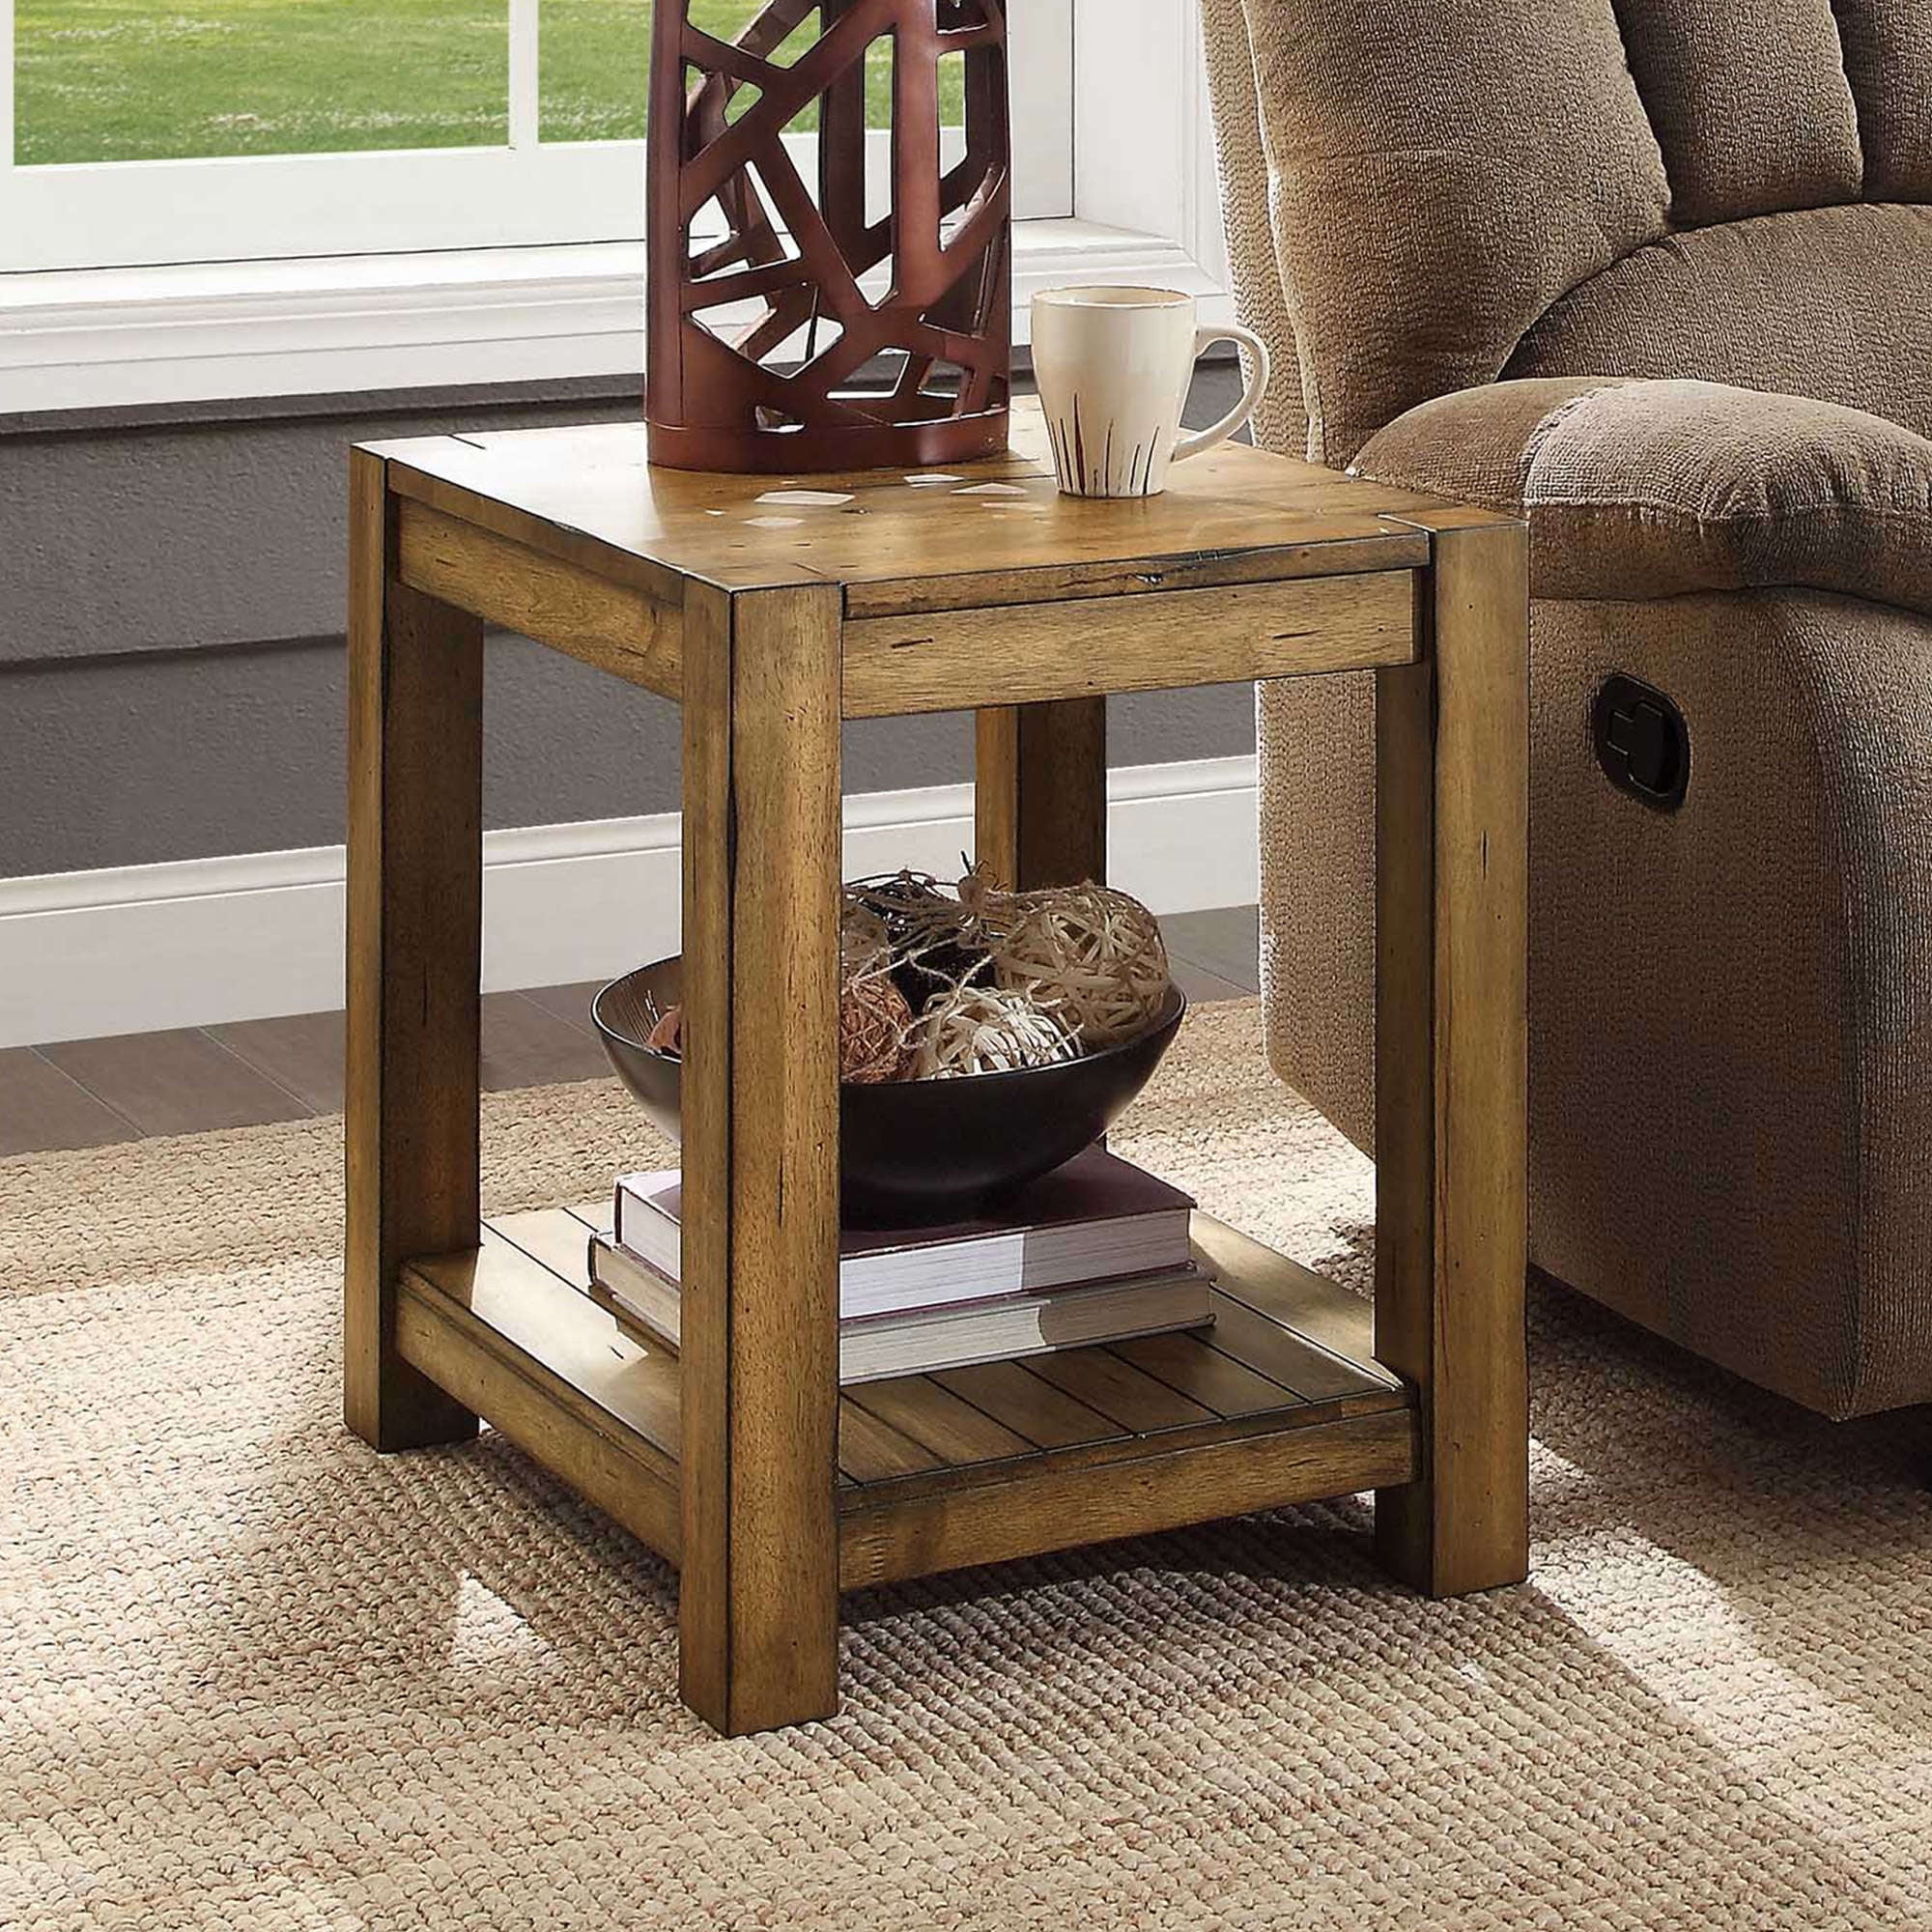 Sofa Side Table Wooden Coffee Table Furniture Tea Table Living Room Bedroom  Decorative Table Bedside Table